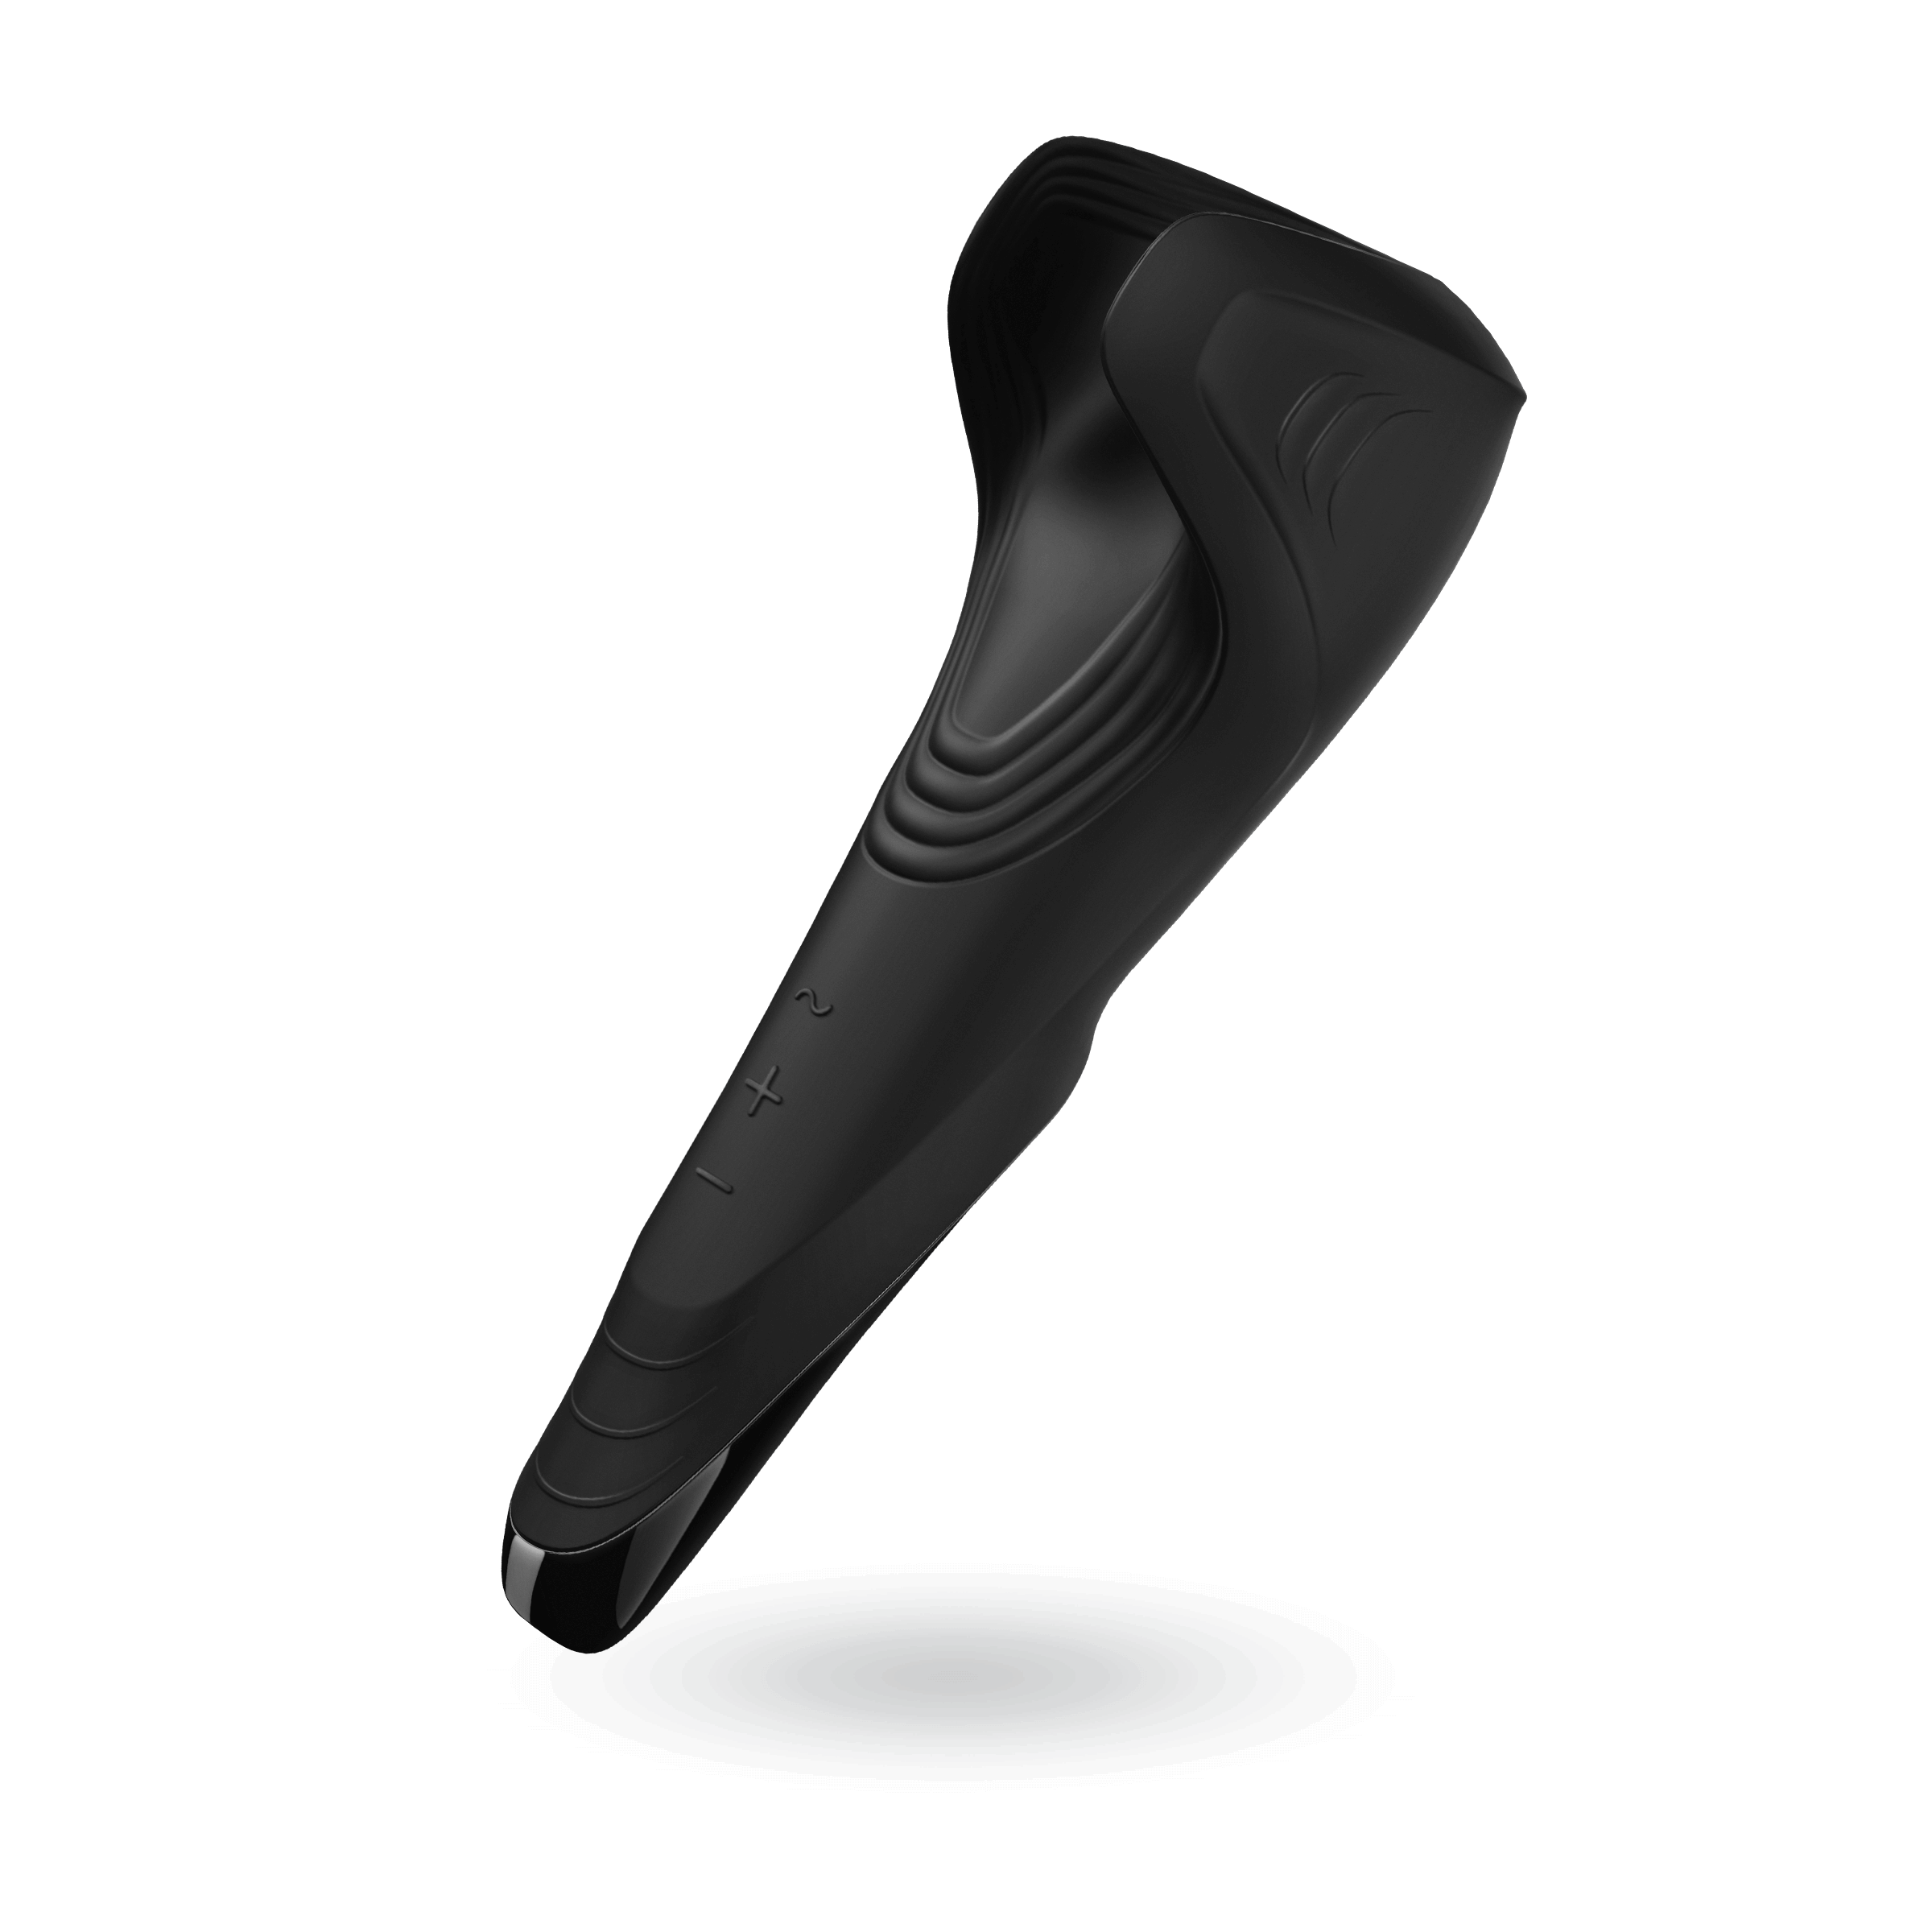 The Satisfyer Men Wand at an angle. This angled shot clearly shows off the area of interior, textured ribbing designed for penis pleasure. It also is the clearest angle showing off the three control buttons on the shaft for the vibrations. It has a Plus, Minus, and Patterns button to easily control the penis vibrator options. | Kinkly Shop